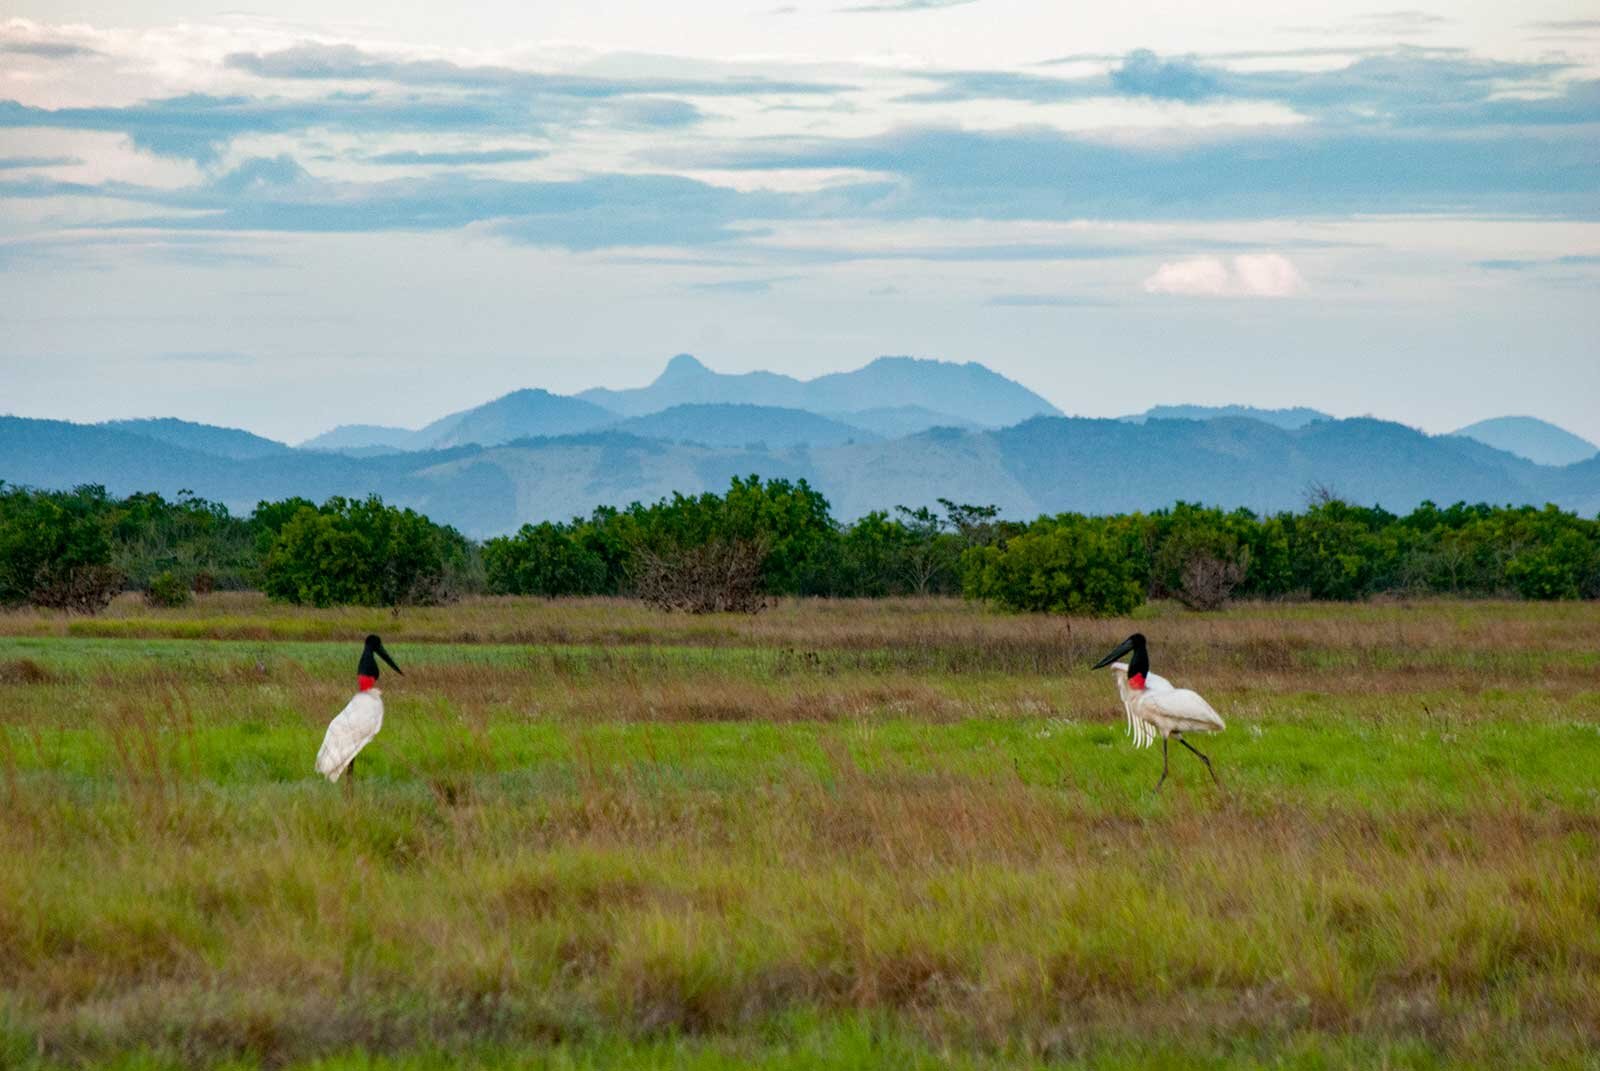  For much of the year the Rupununi savannah turns into a wetland. It was thought to be the location of the mythical Lake Parime – a contender for the location of Sir Walter Raleigh’s fabled city of El Dorado. Explorers including Raleigh travelled thi